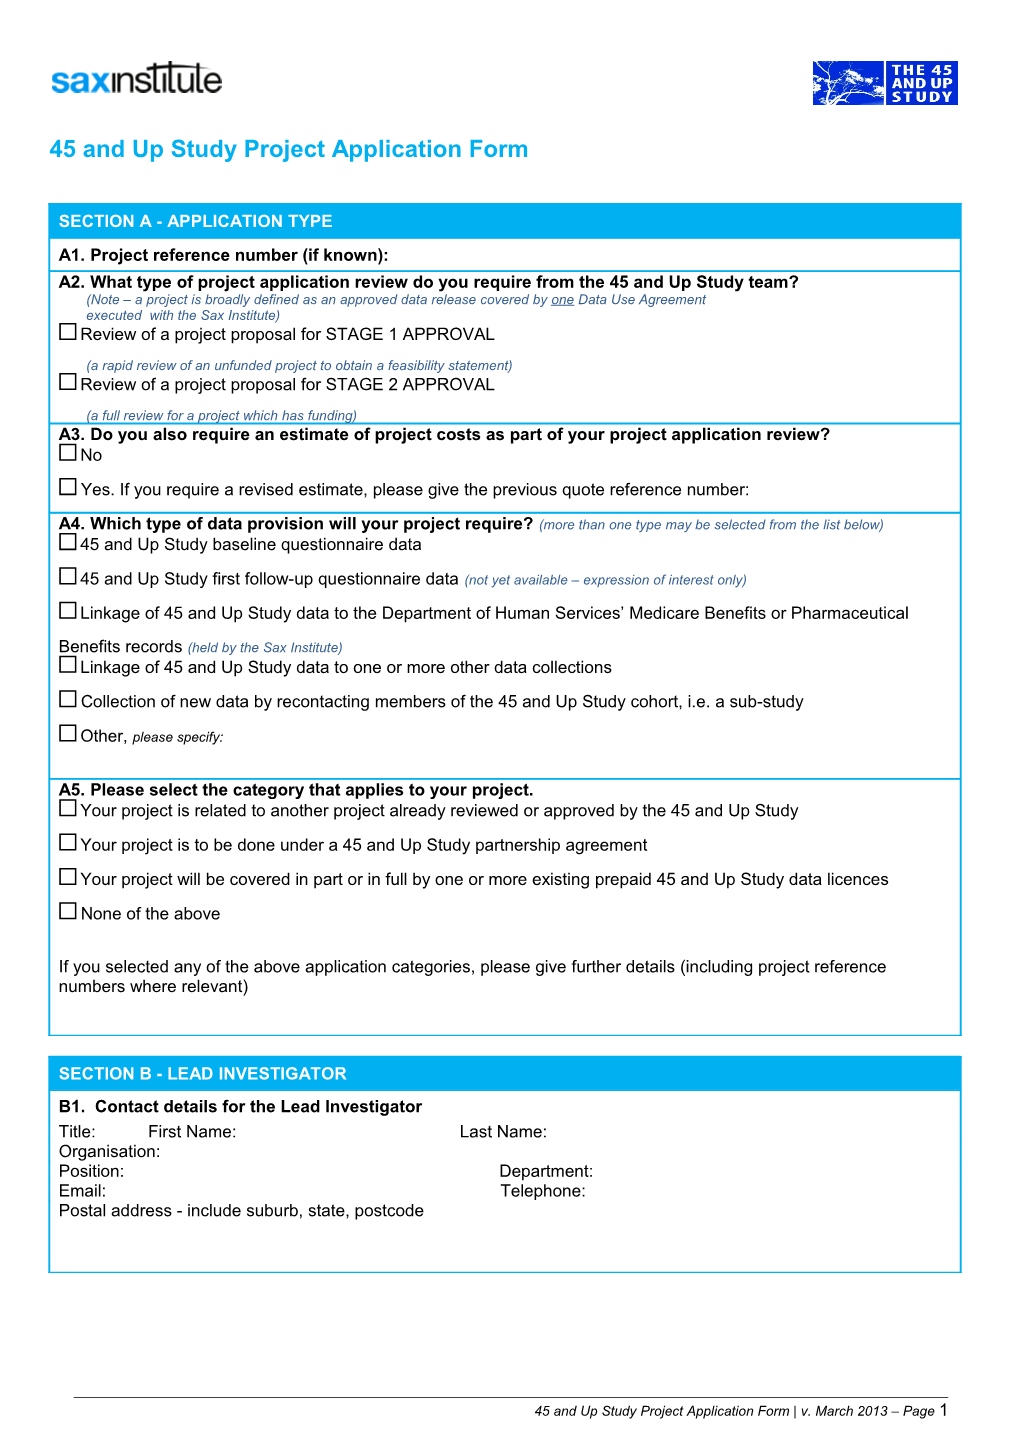 45 and up Study Project Application Form